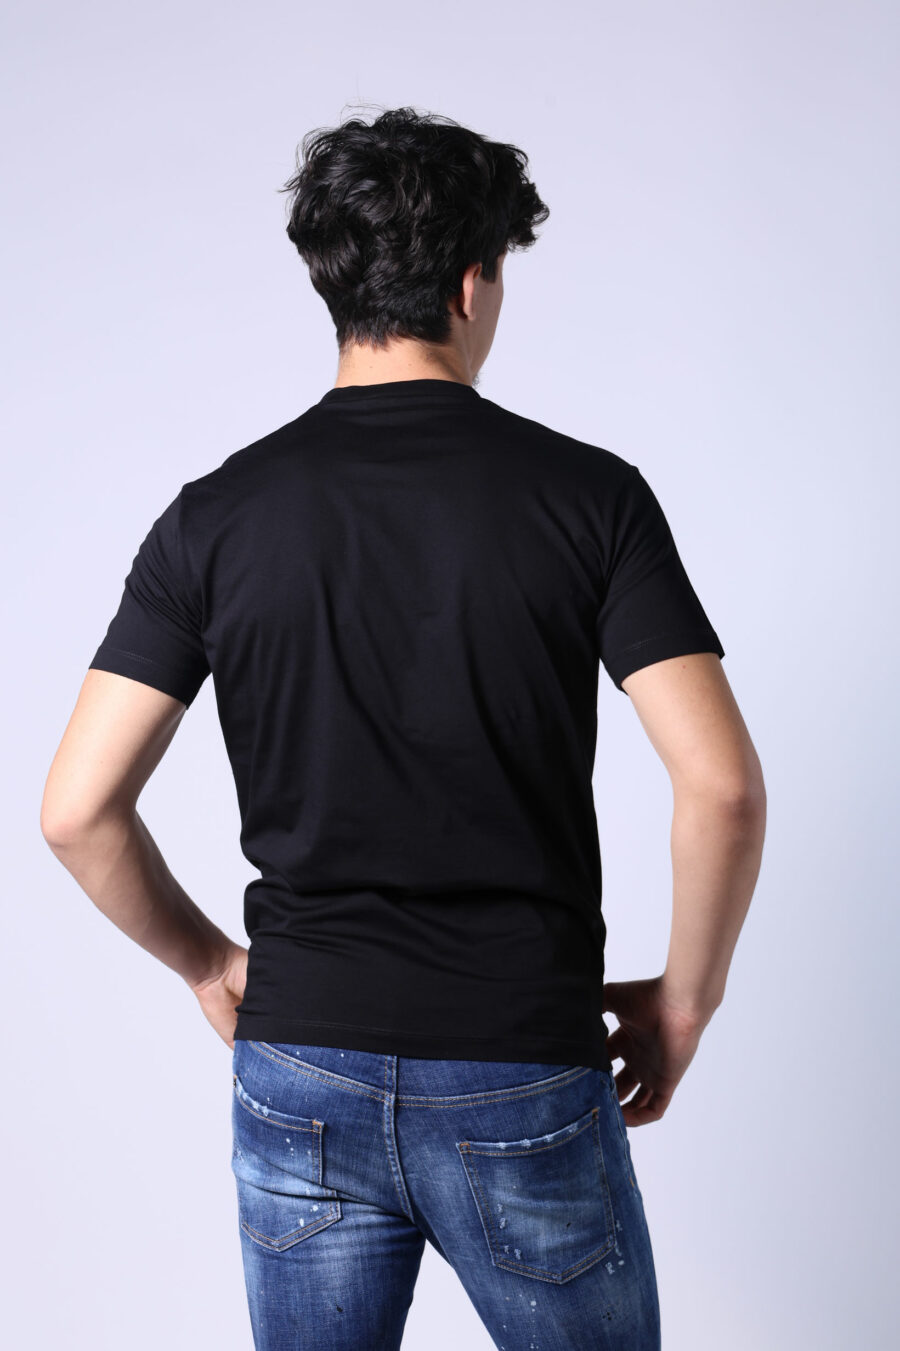 Black T-shirt with red logo - Untitled Catalog 05309